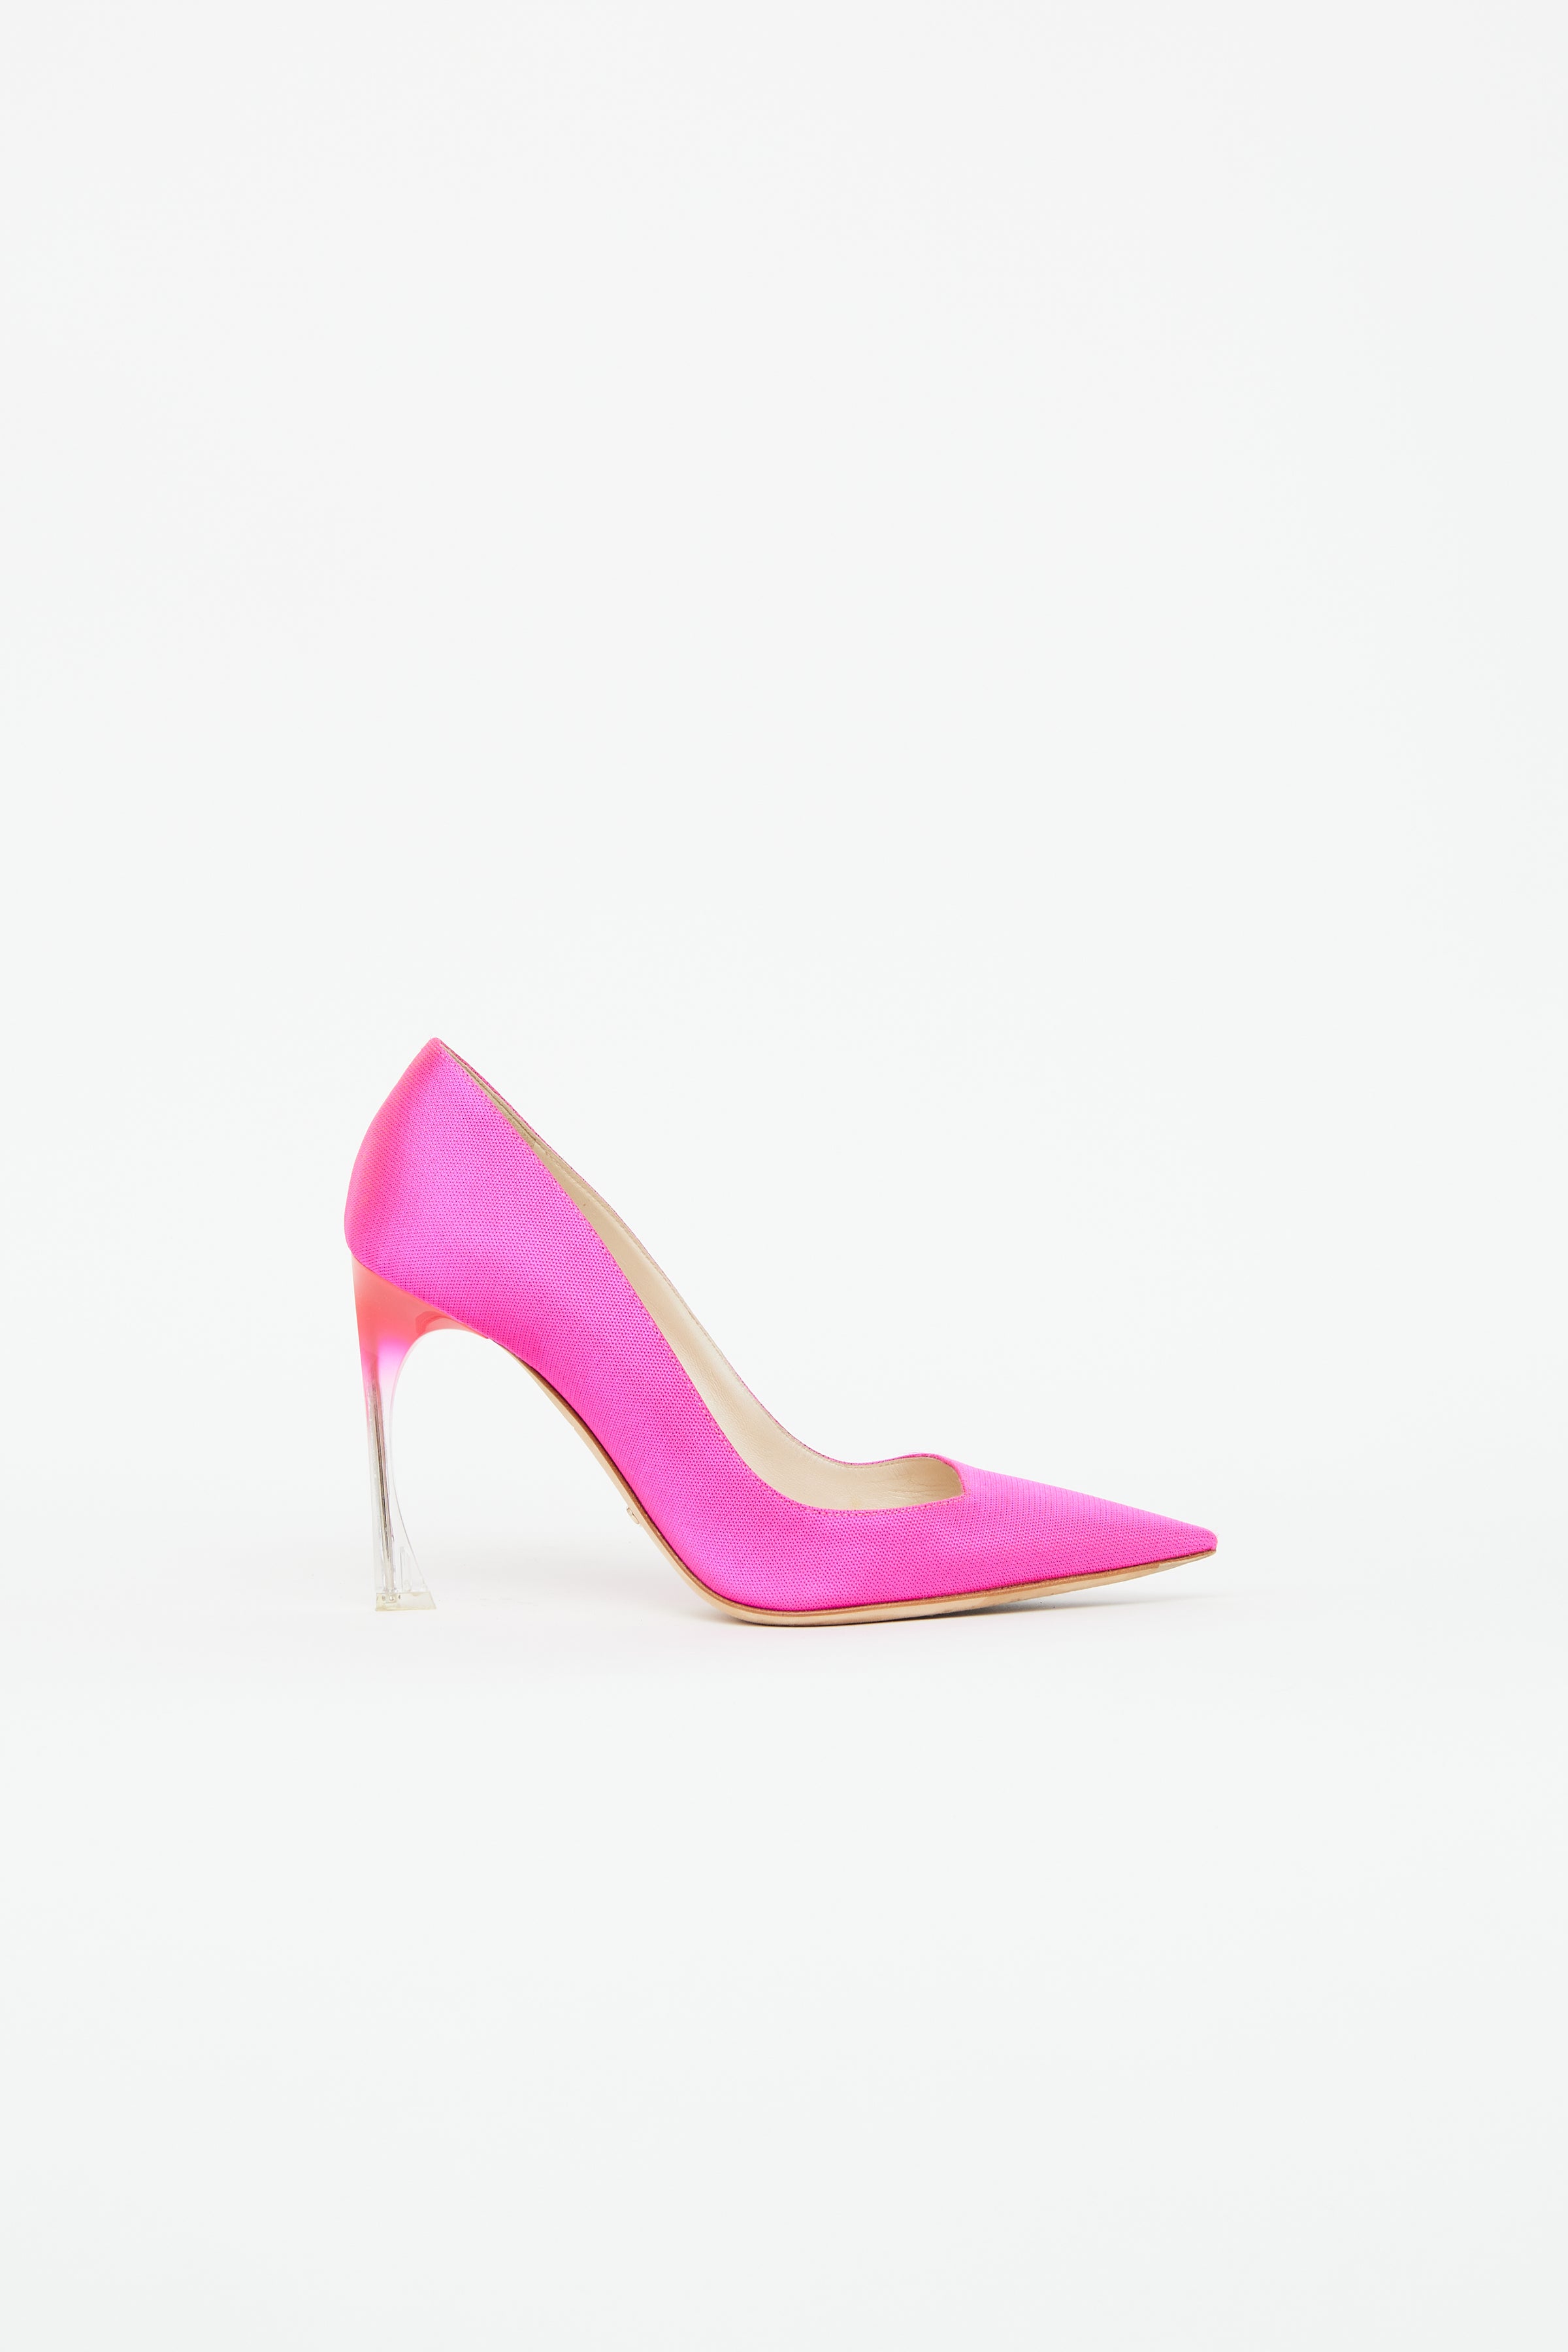 Classic high heels made of natural grain leather in powder pink - BRAVOMODA